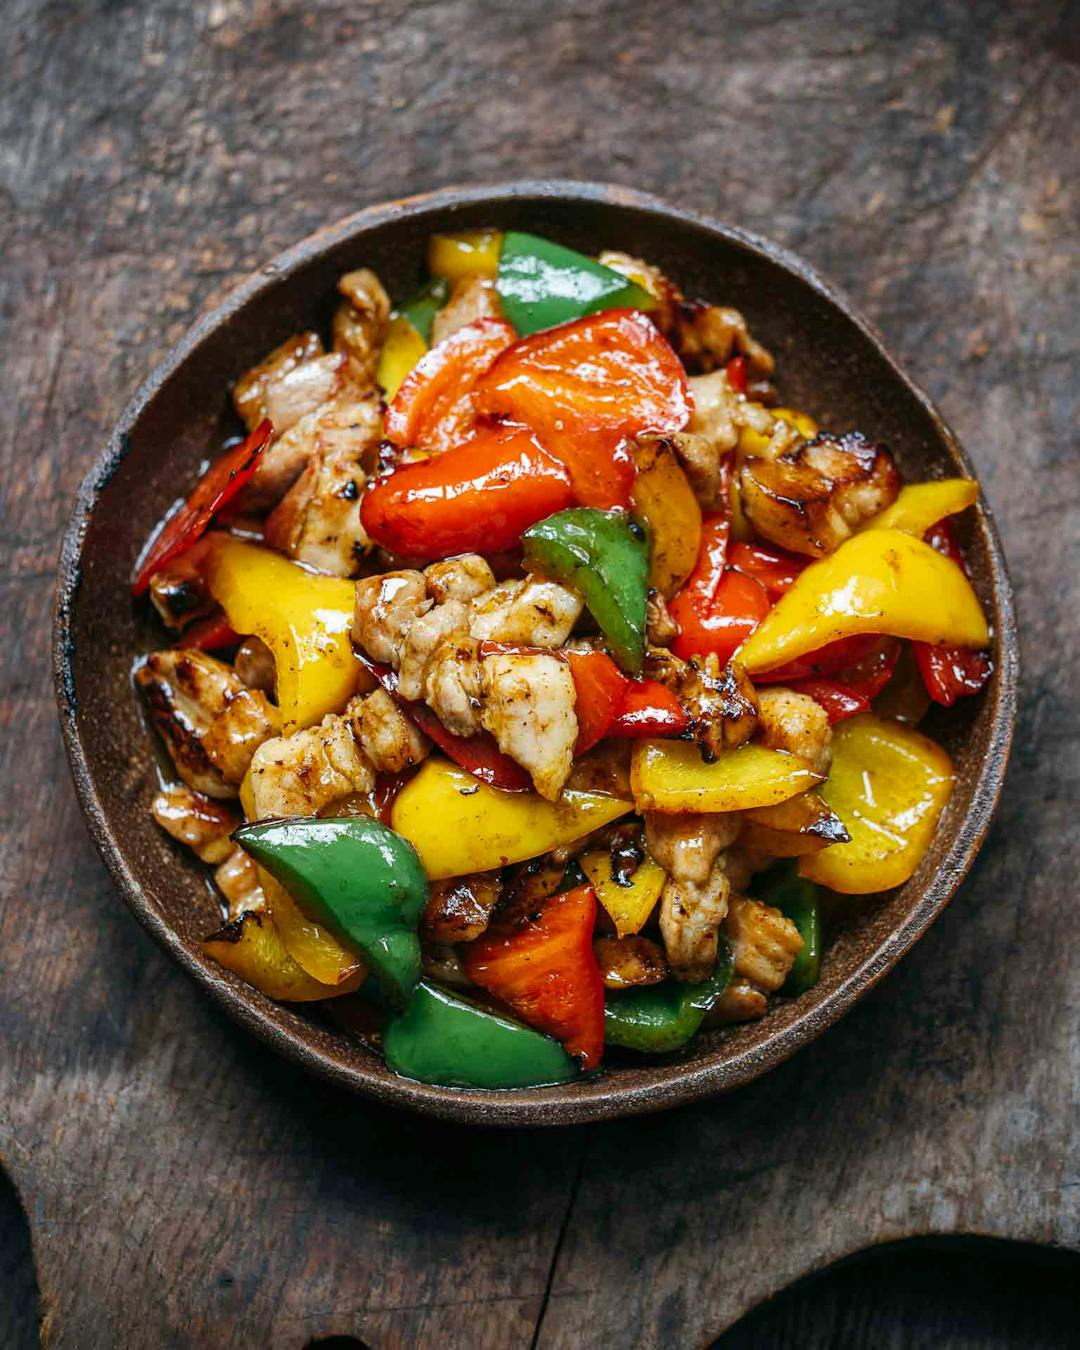 Pork and peppers